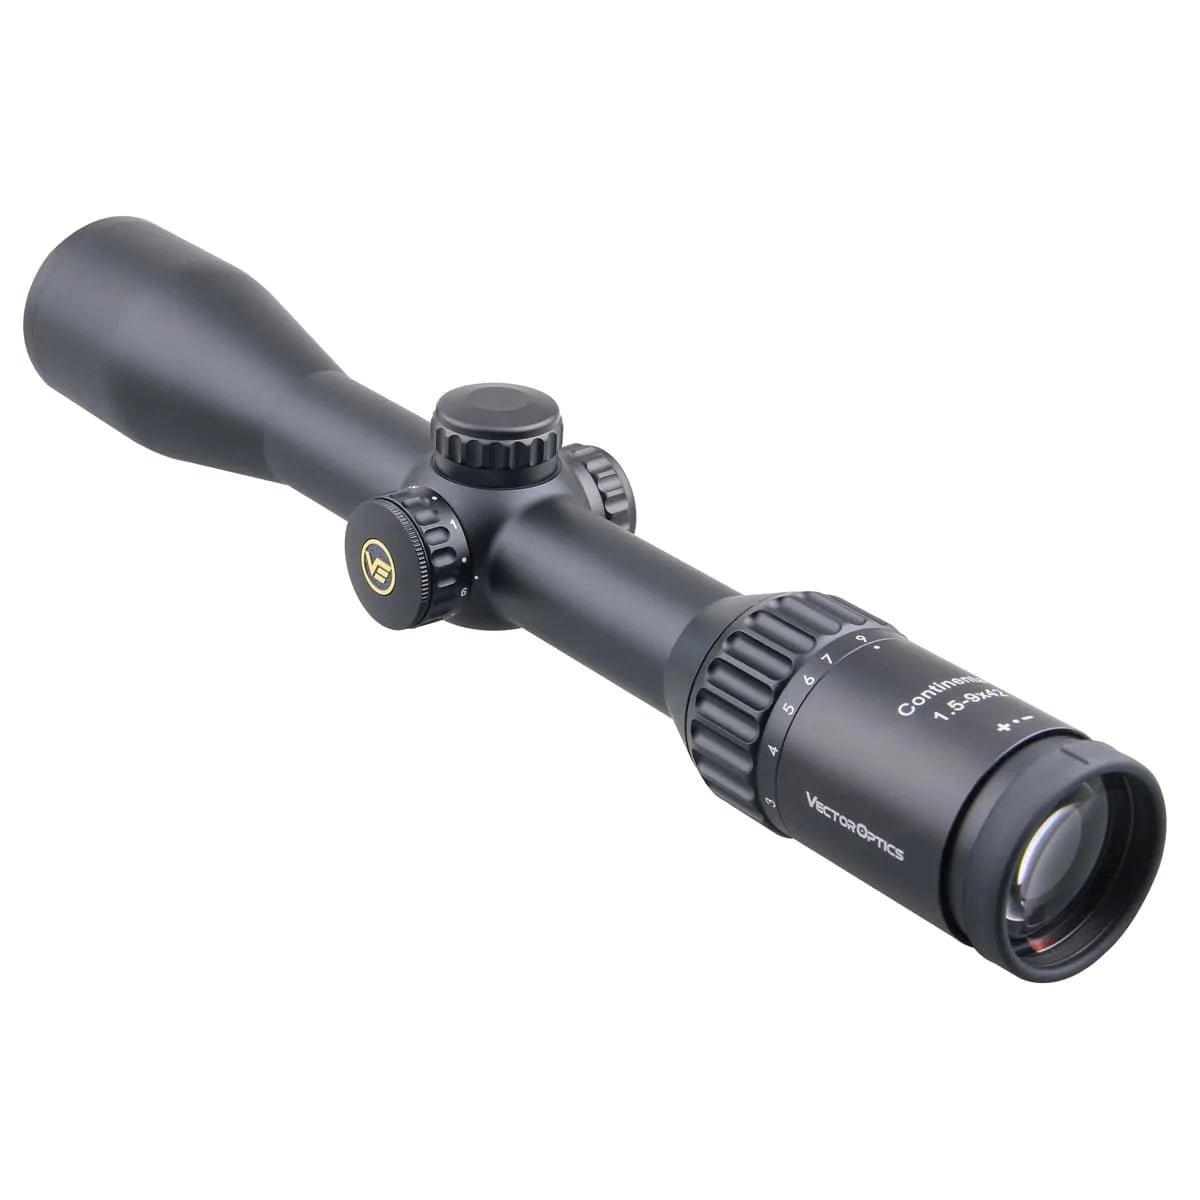 Continental, 1.5-9 X 42, SFP, Riflescope for Hunting